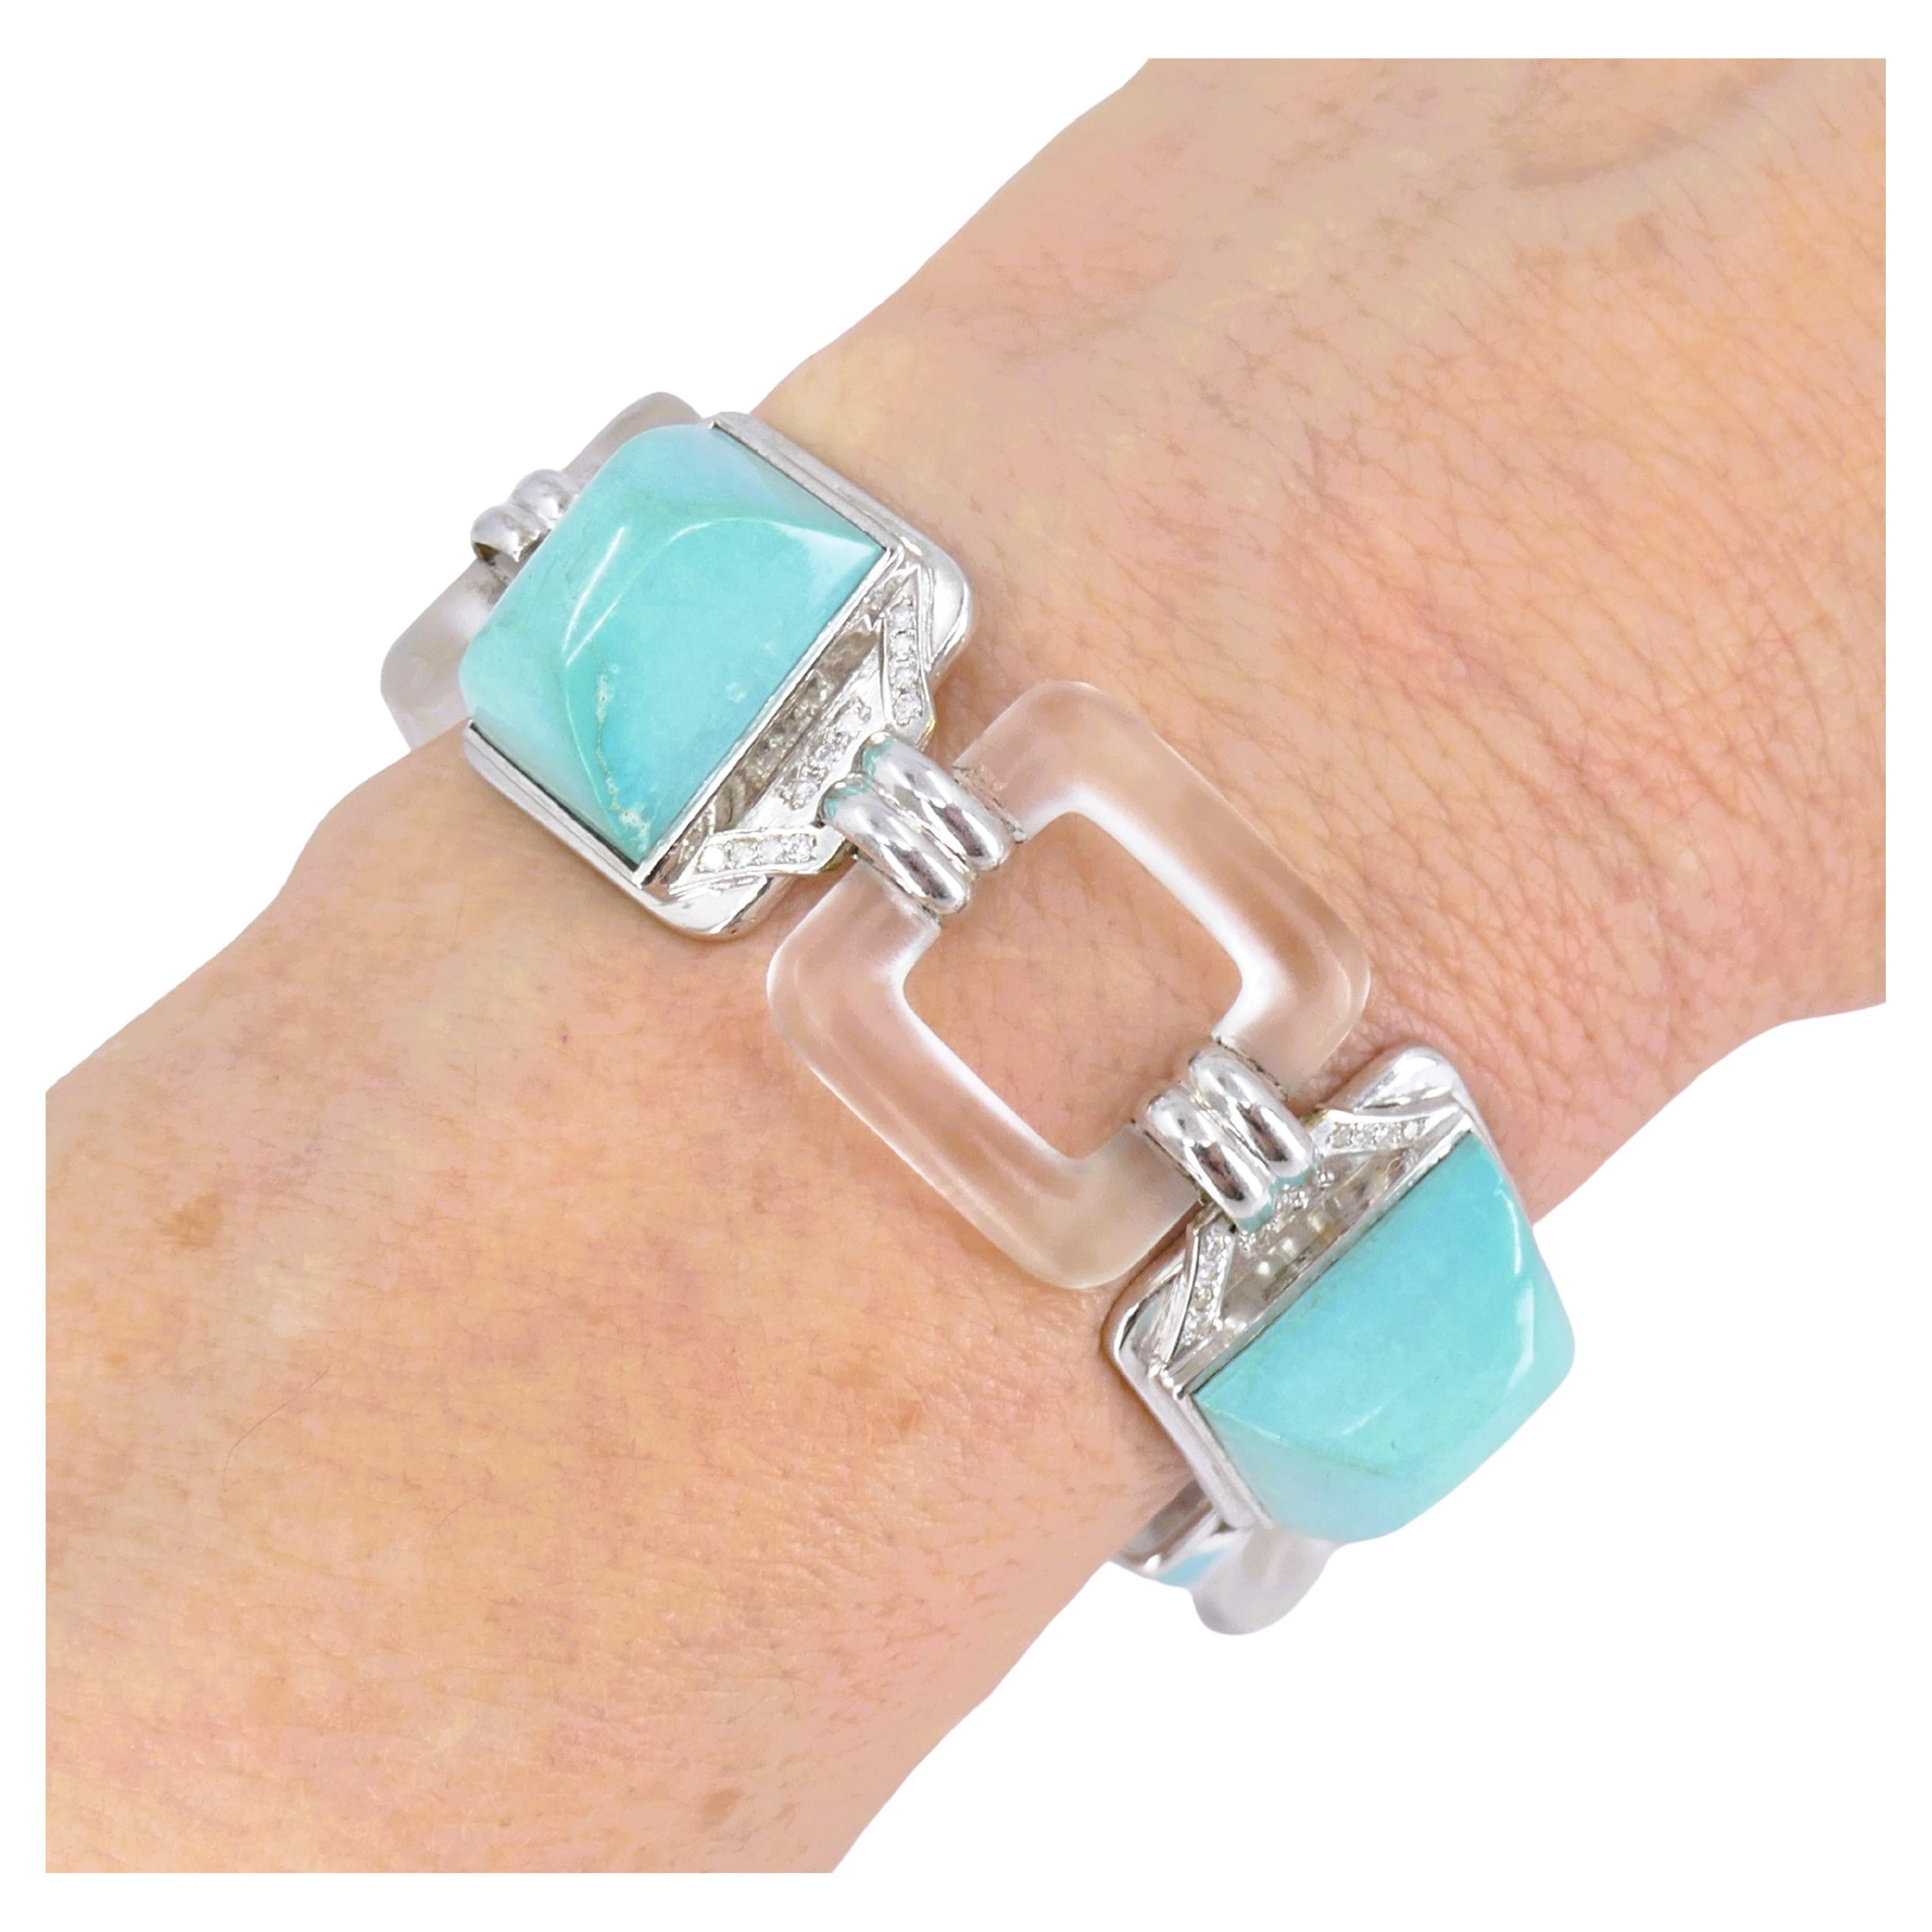 A gorgeous Boucheron vintage bracelet, made of 18k white gold, turquoise, rock crystal and diamond. Turquoise cabochons are shaped in truncated pyramids. Gems are bezel set in rectangular white gold frames that are encrusted with diamonds. Each